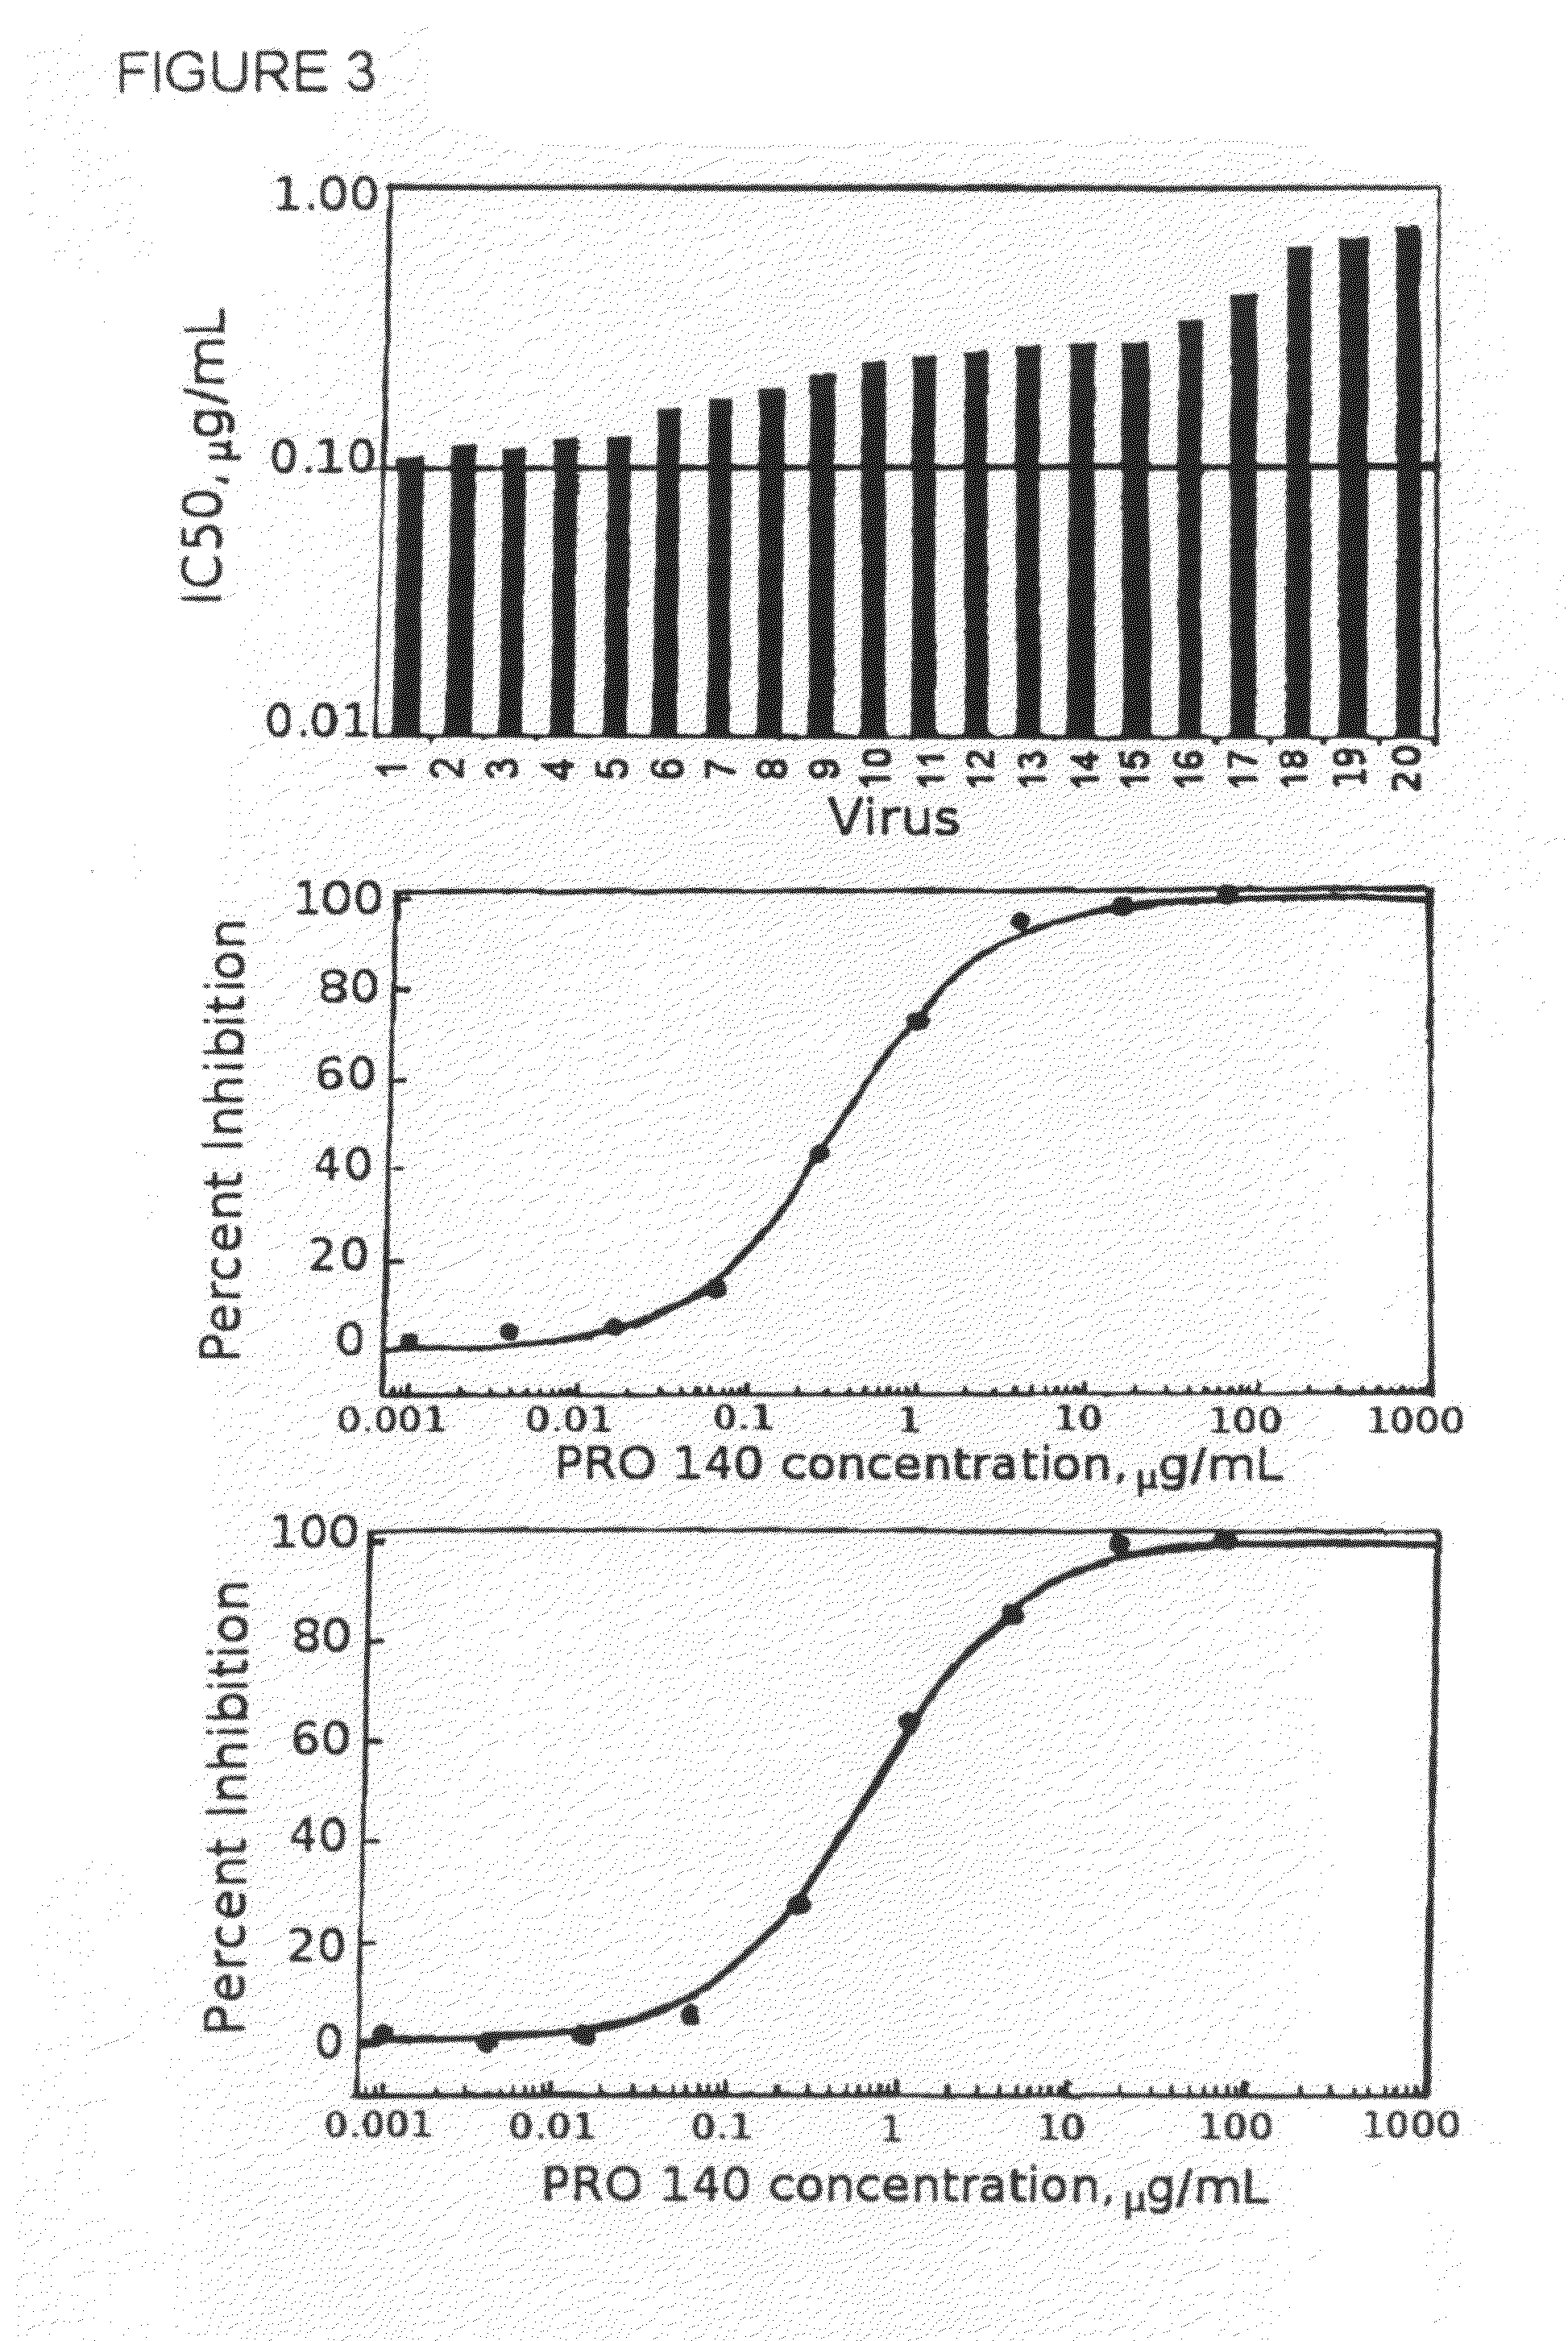 Methods for reducing viral load in HIV-1 infected patients